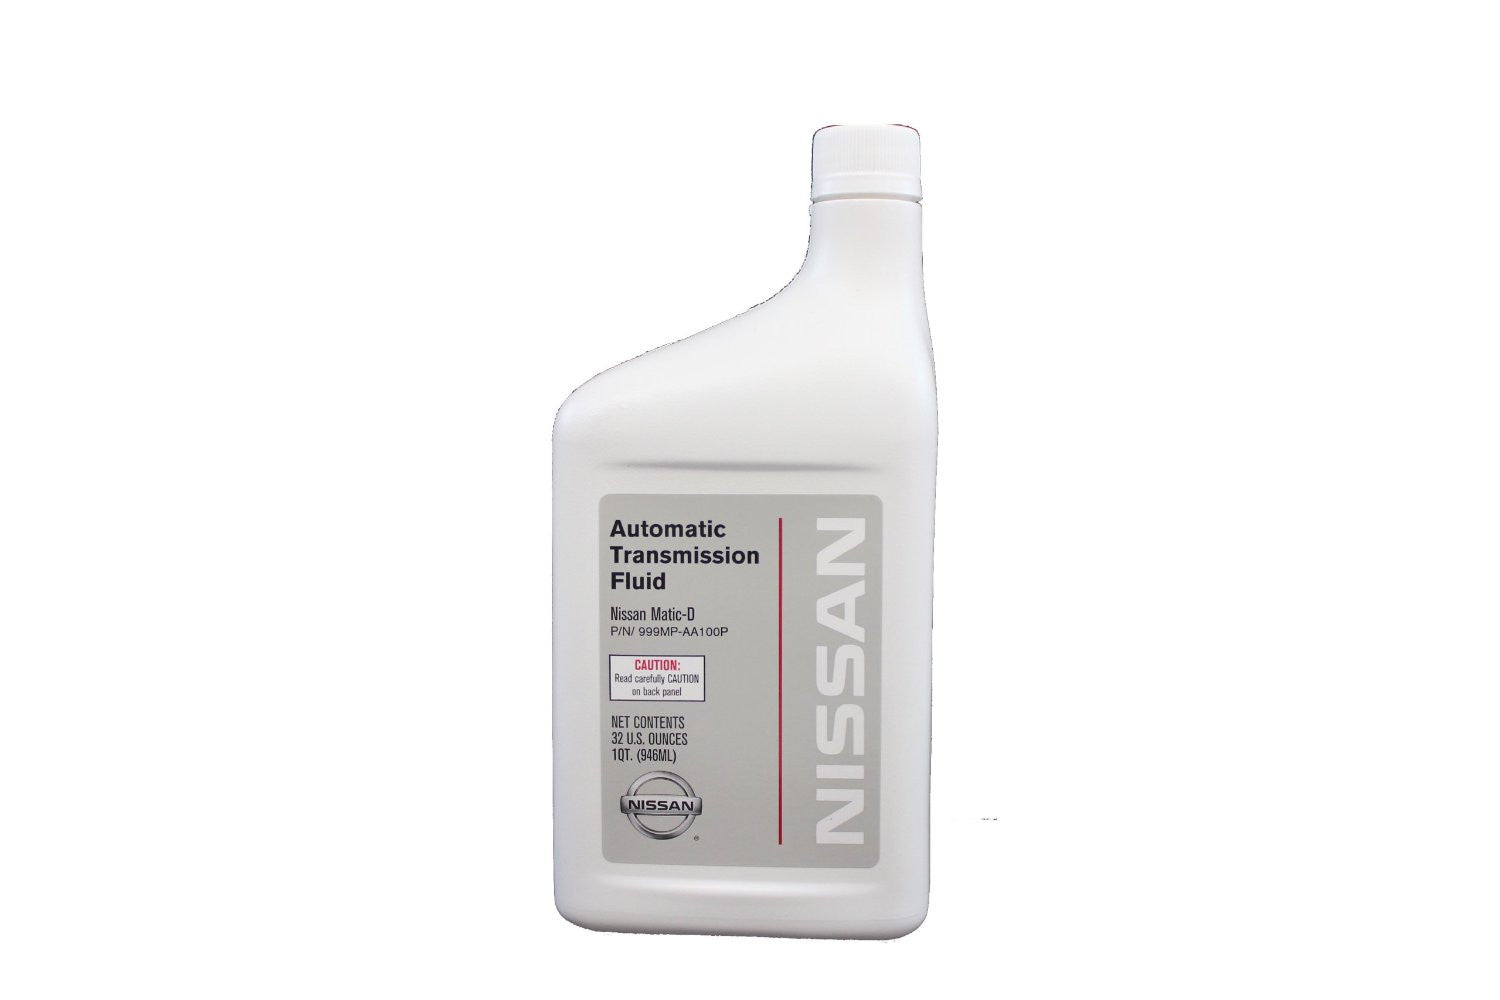 Масло nissan atf matic. Nissan ATF matic d Fluid. Nissan matic Fluid d 1 л. Nissan matic Fluid s 4л. Nissan matic Fluid d 4л (kle22-00004).